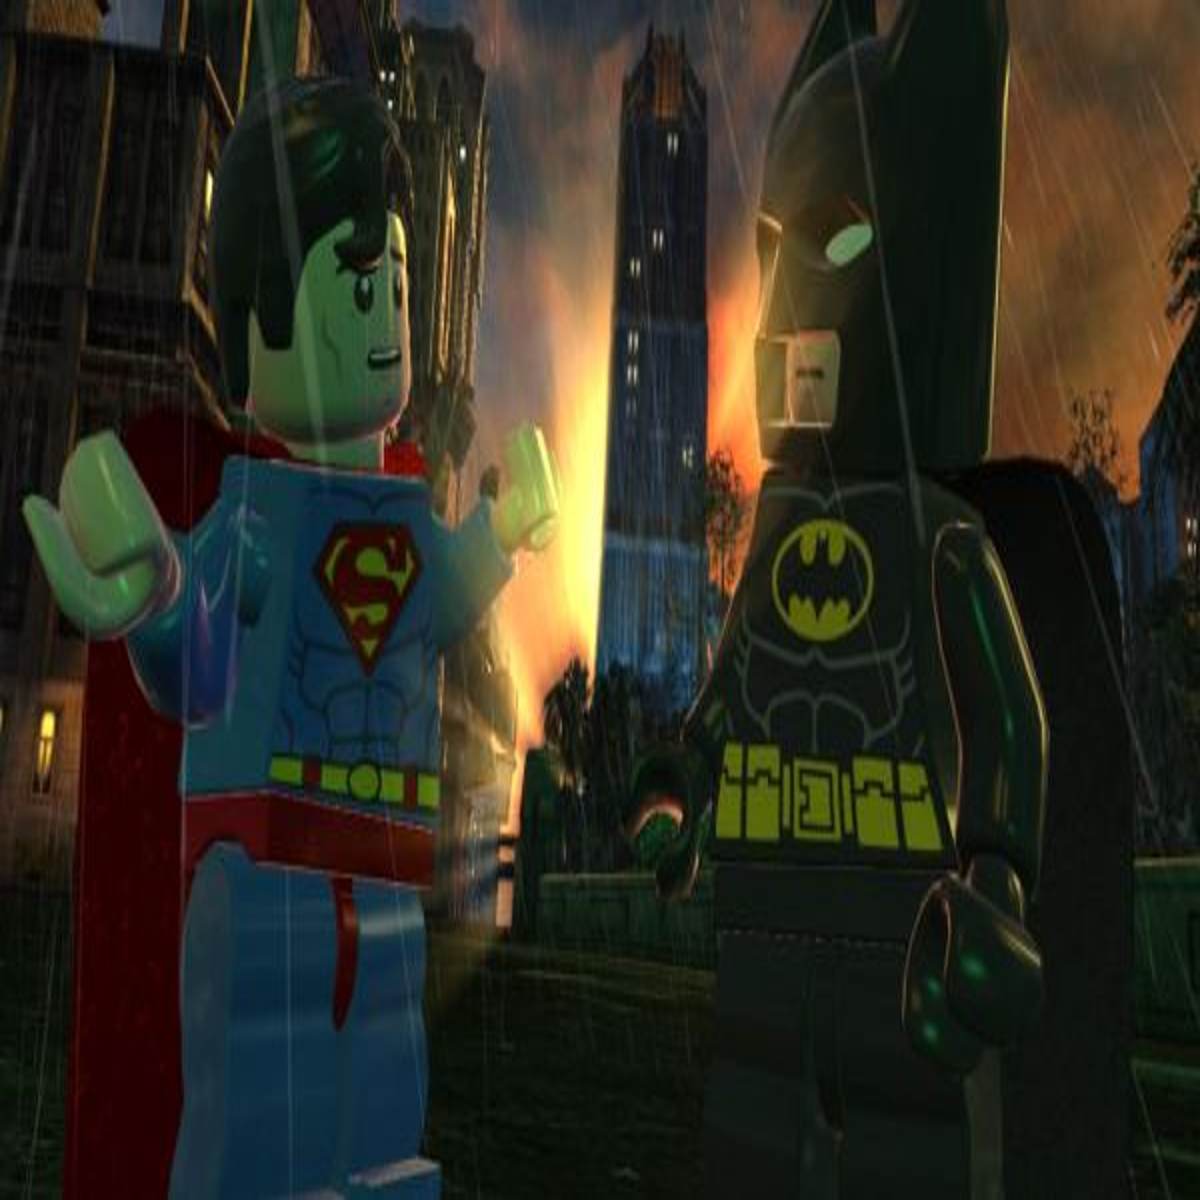 Lego Batman 2 Red Brick Locations, Where To Find It? - News